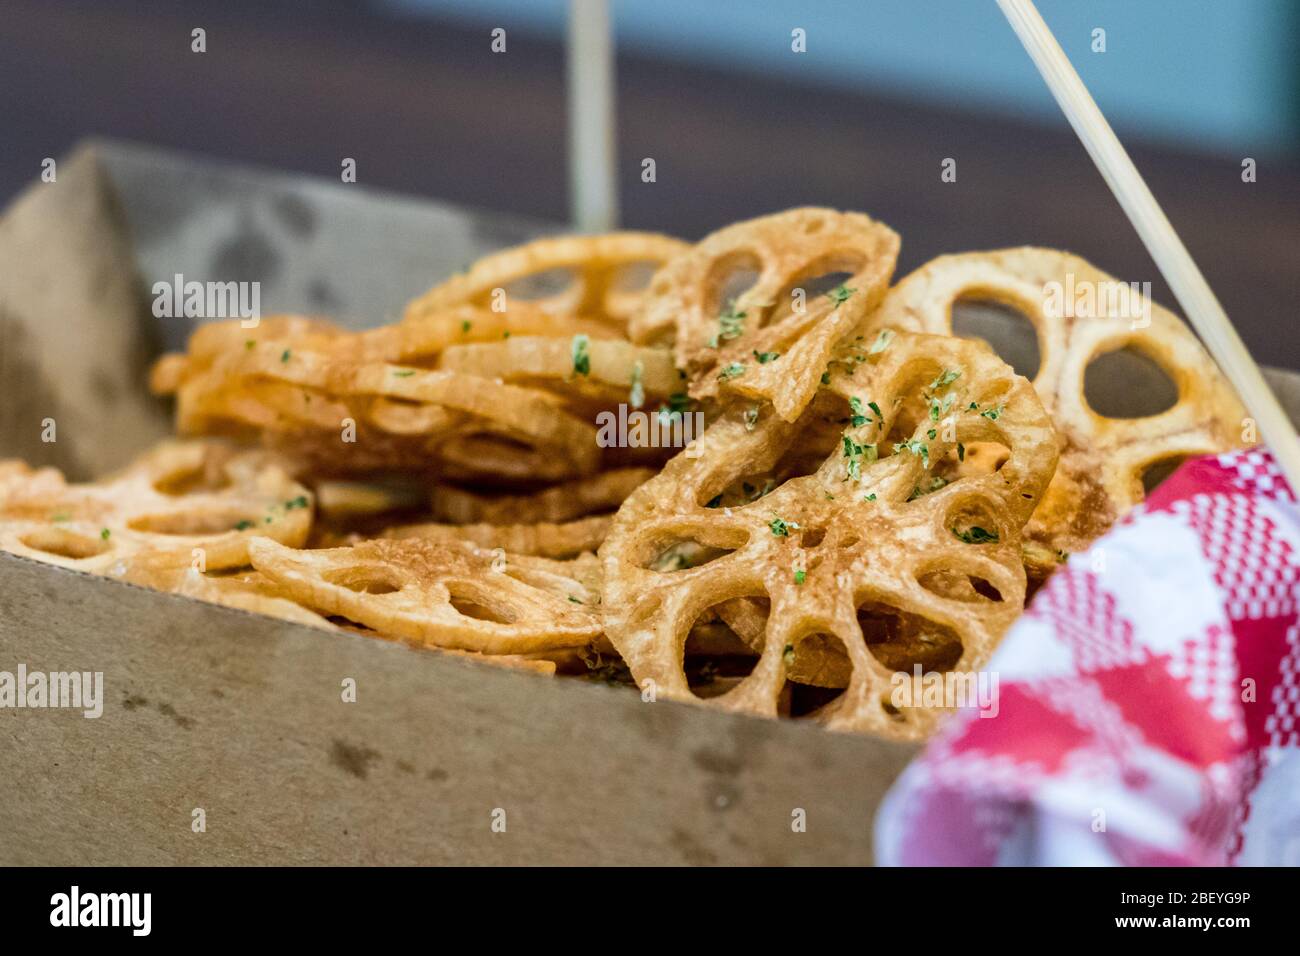 Close-up of a serving size of Lotus Root fried chips on a cardboard box Stock Photo